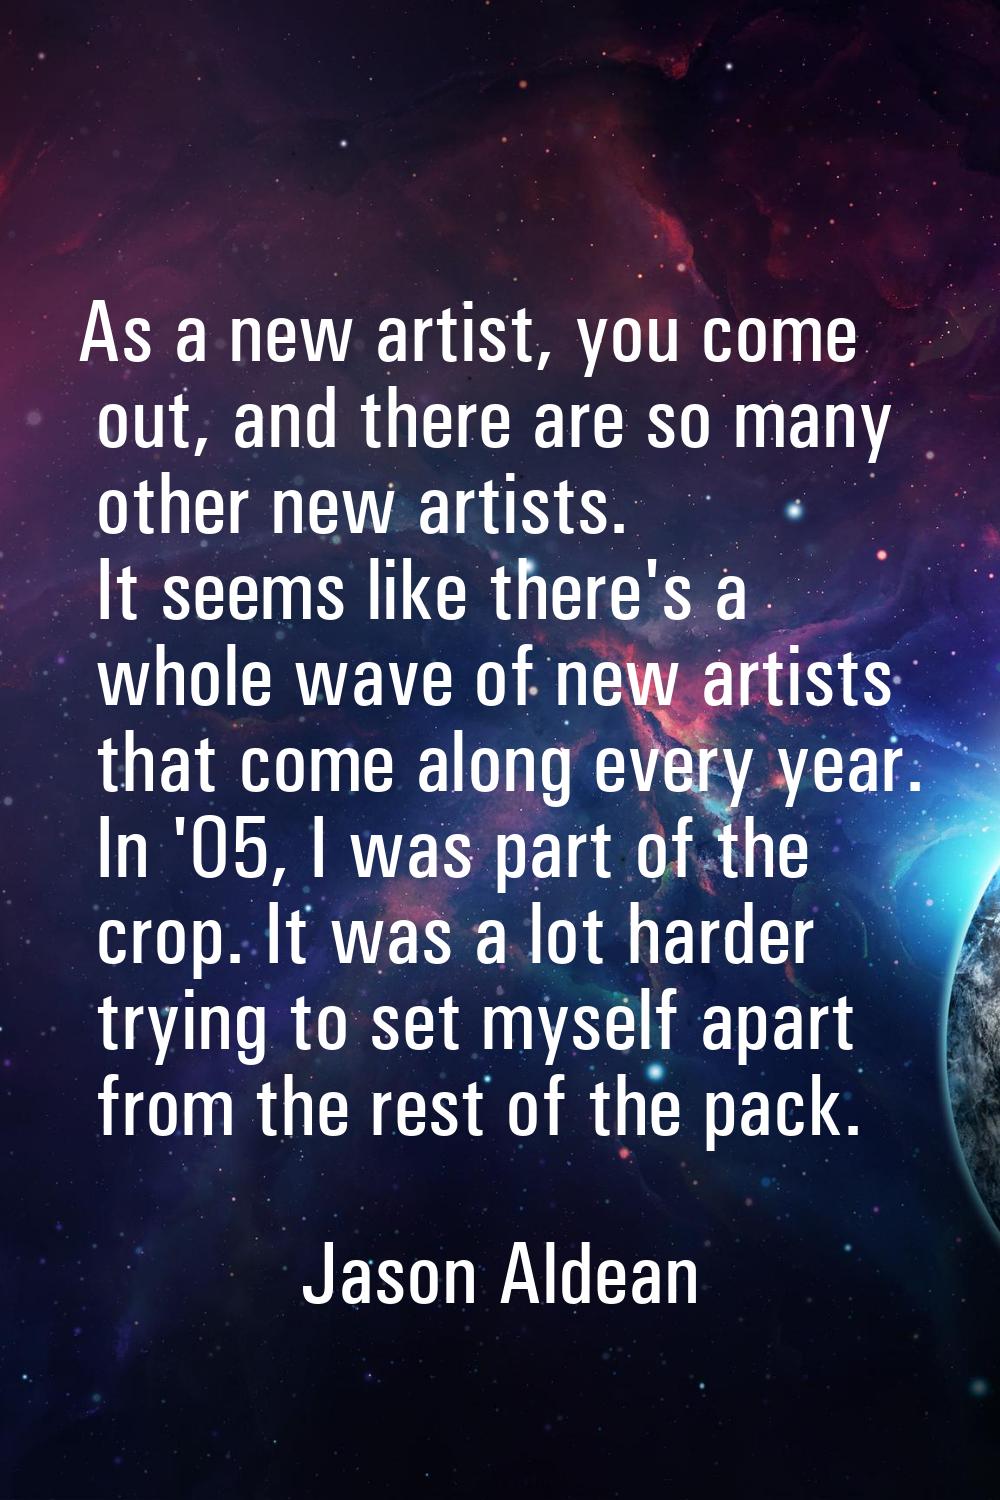 As a new artist, you come out, and there are so many other new artists. It seems like there's a who